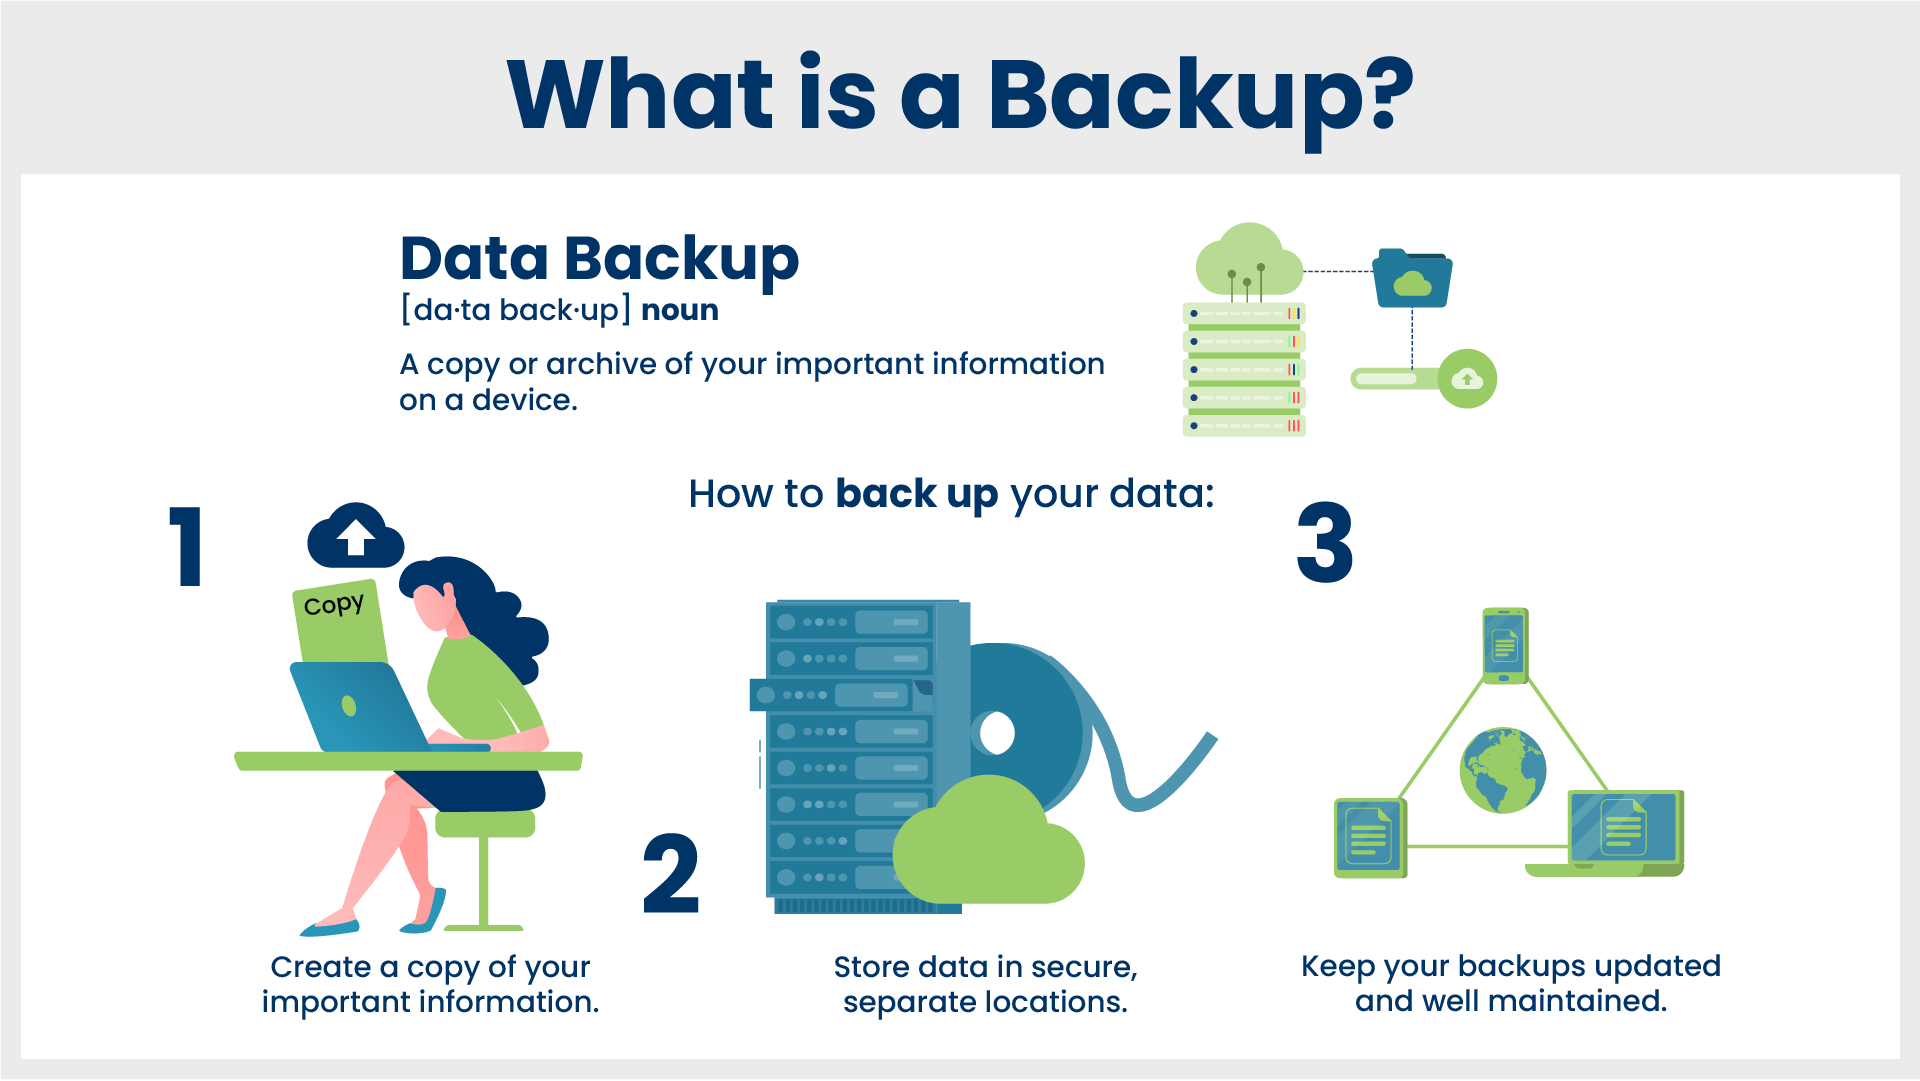 What are in backups?